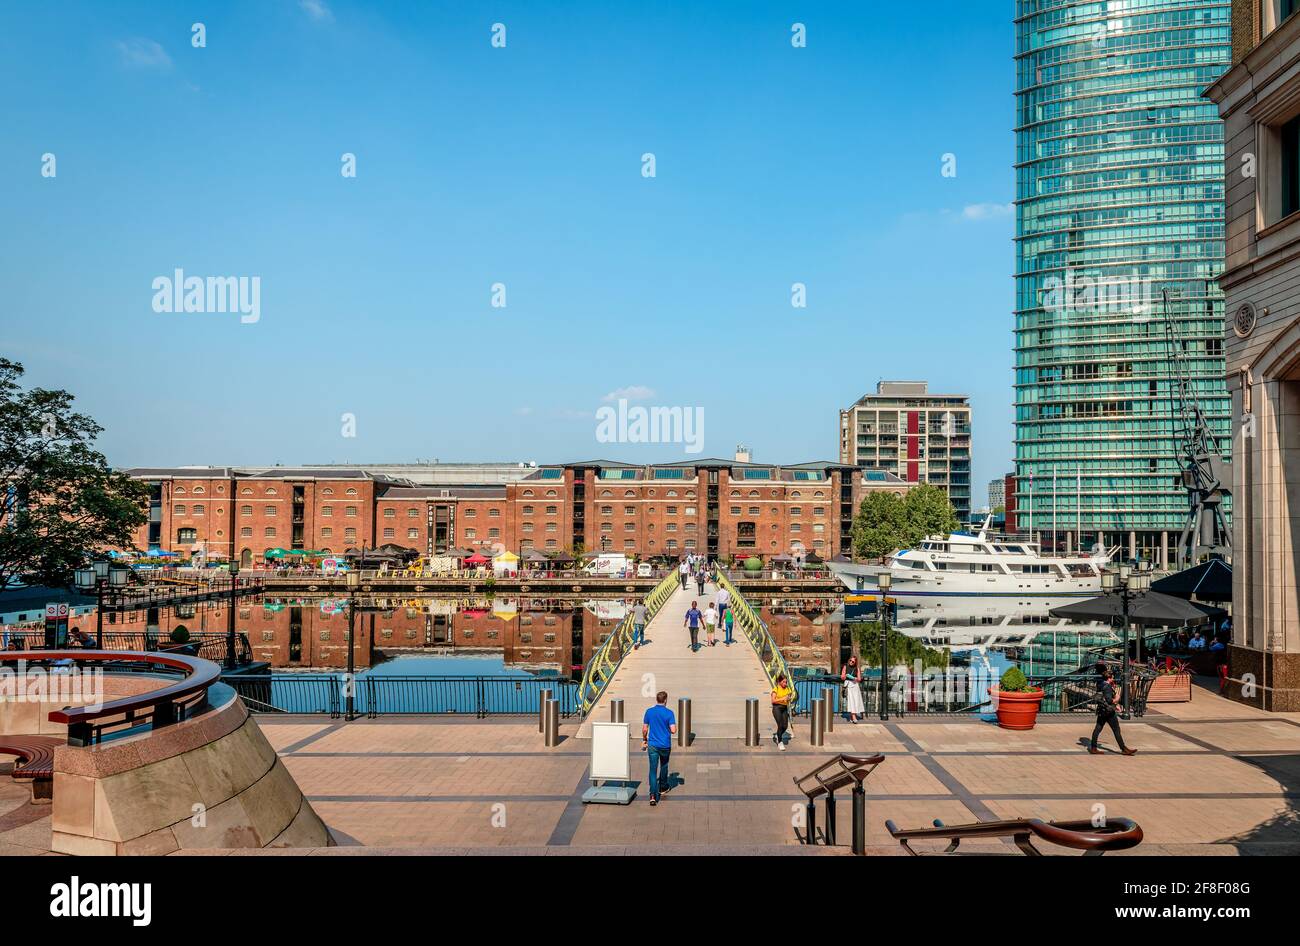 London, UK - August 23 2019: View of the West India Quay, the North Dock and the North Dock pedestrian bridge in Canary Wharf Estate. Stock Photo